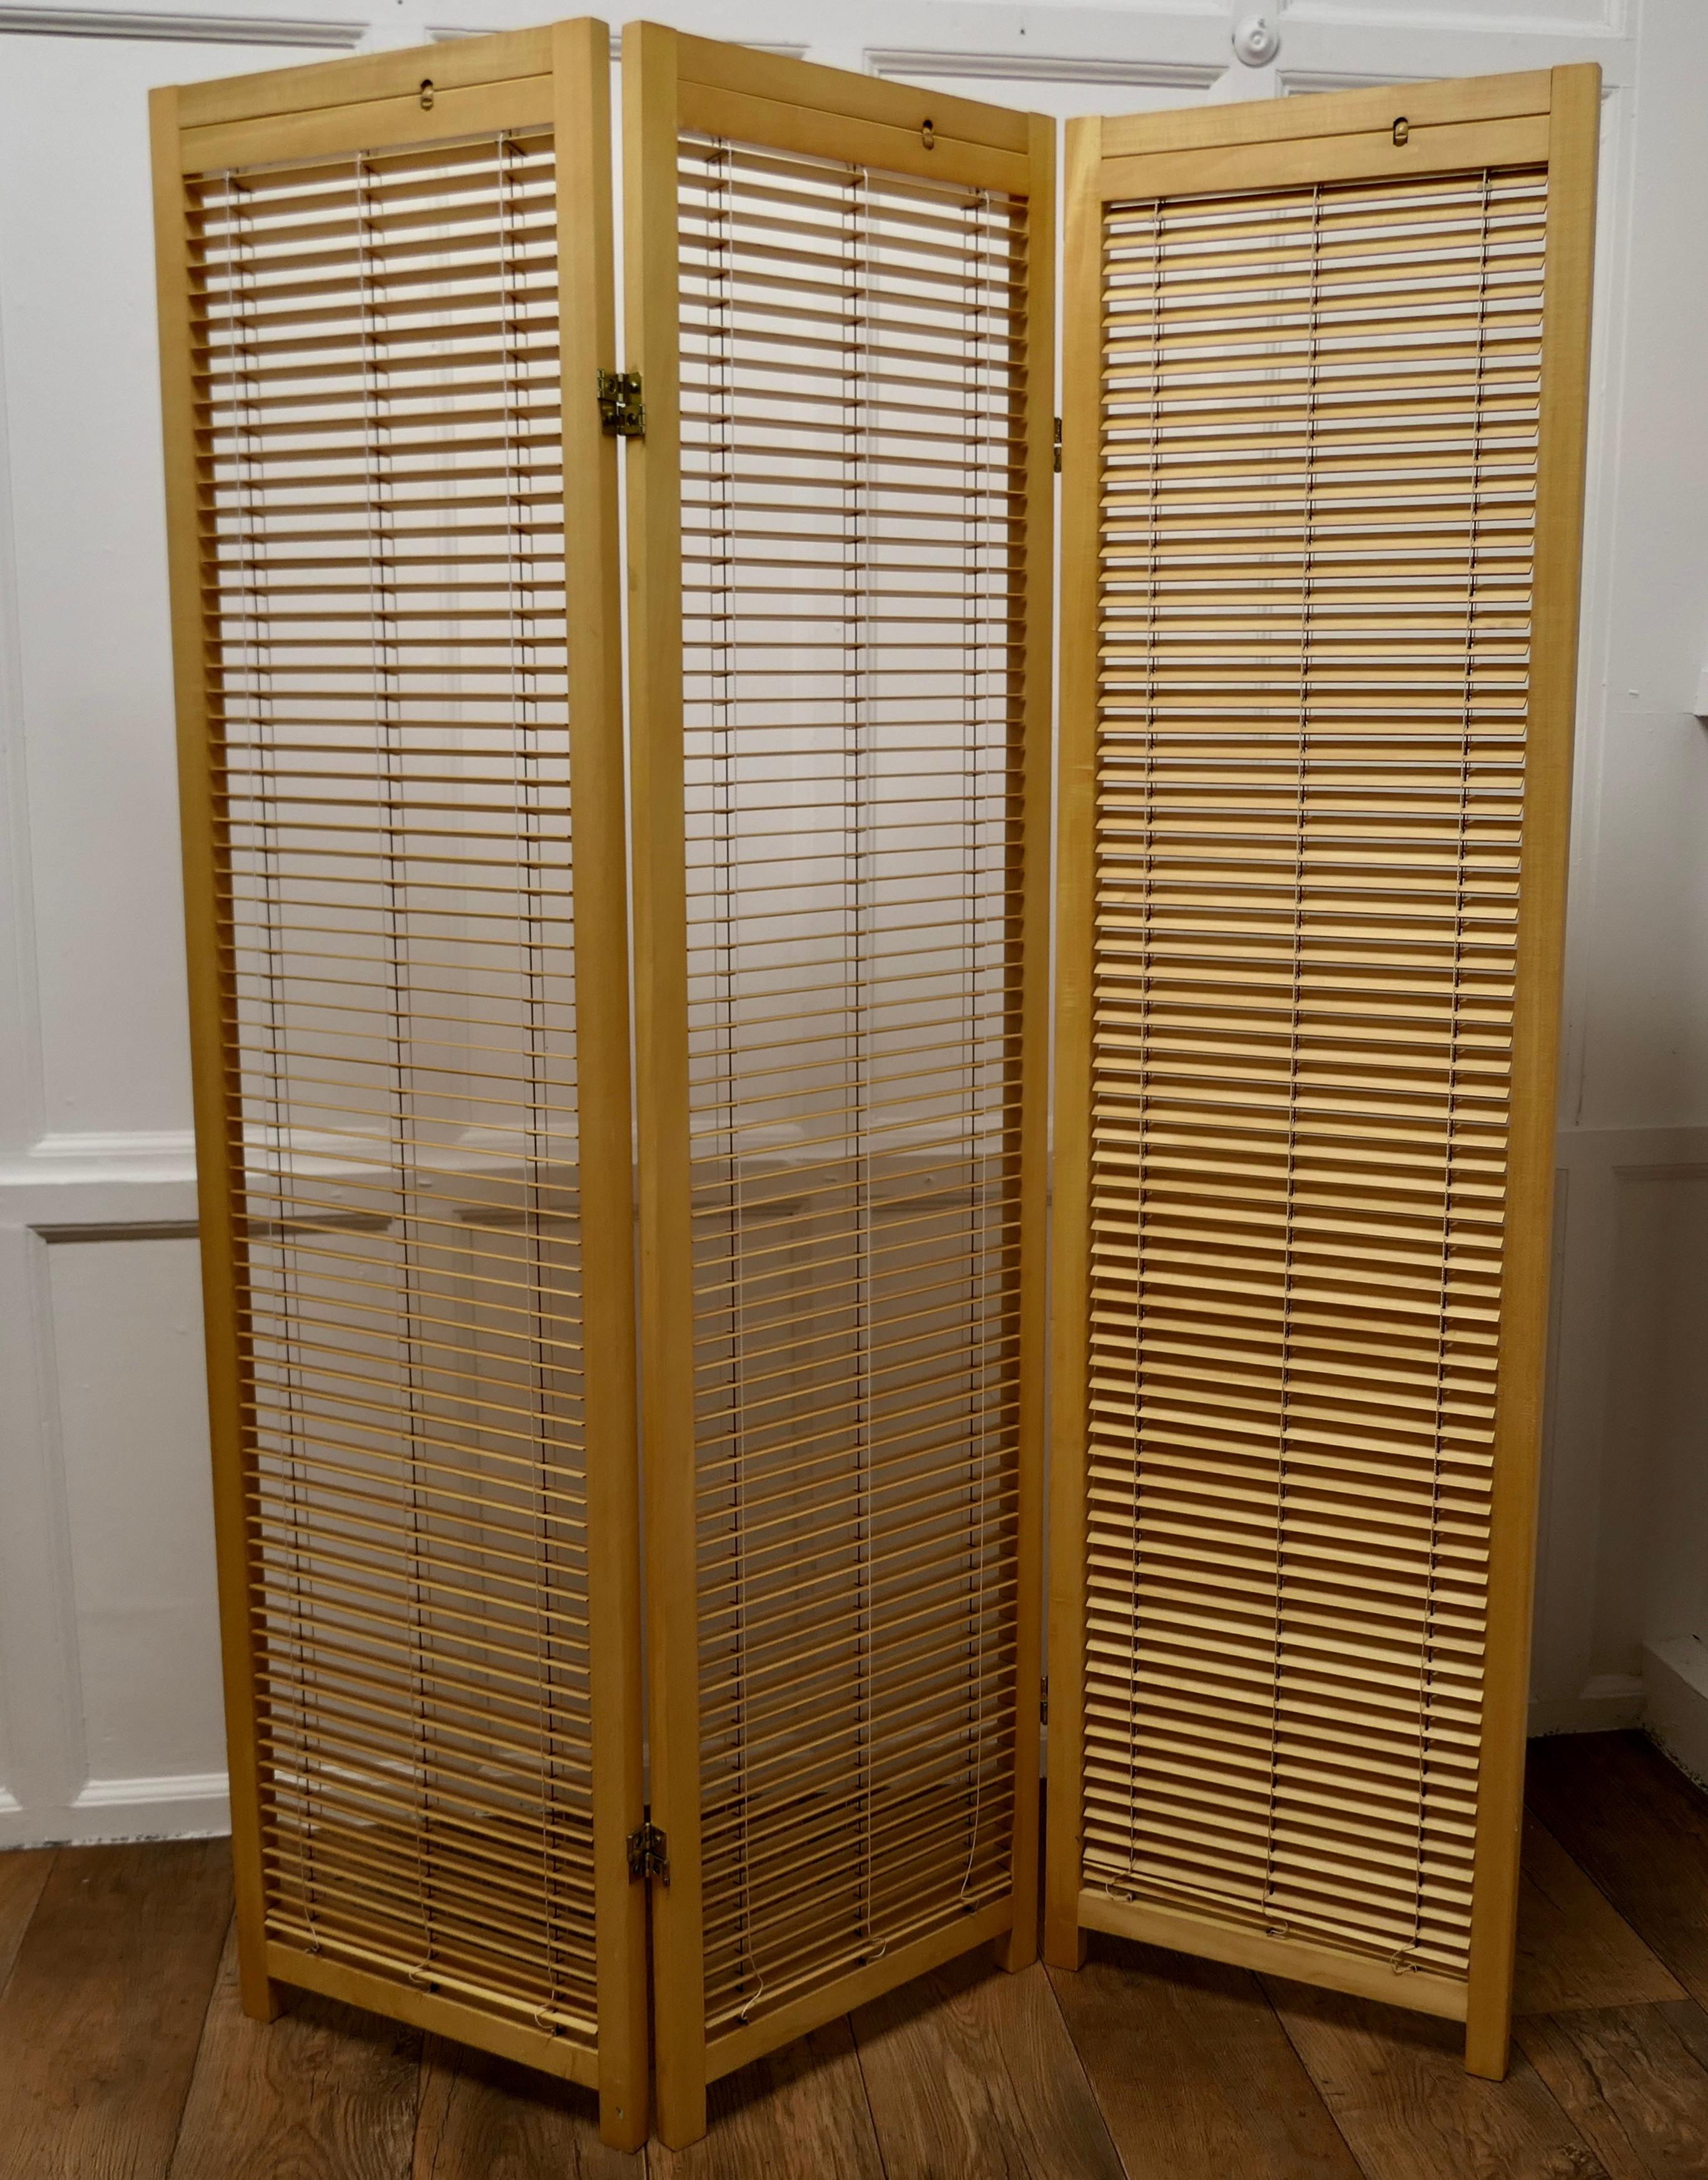 French Blonde Beech Louvered Screen Room Divider

The screen has 3 folds, each one has a mechanical full length Louveredsurrounded by a sturdy frame, this superb folding screen or room divider is an excellent piece for privacy or shade which ever